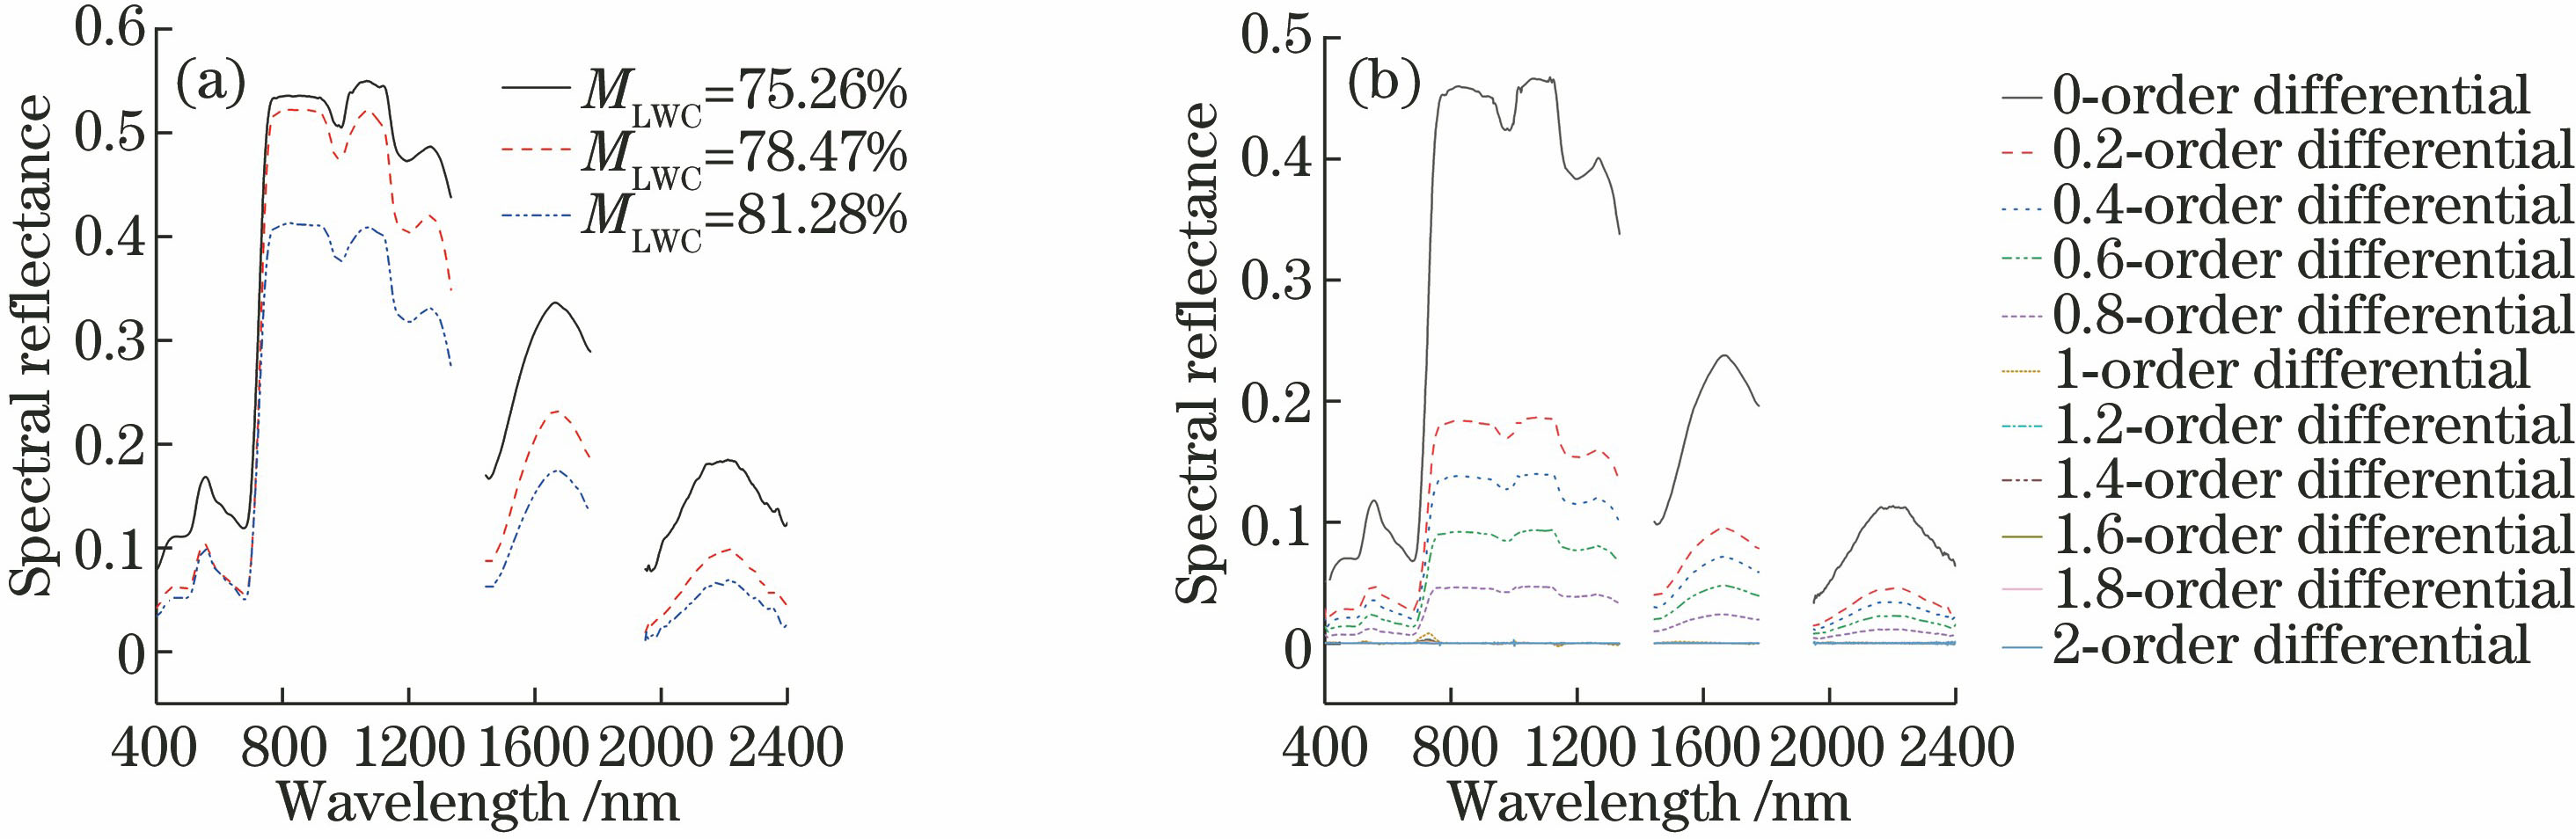 Canopy spectral curves of spring wheat. (a) Canopy spectral curves of spring wheat with different water contents; (b) canopy spectral curves of spring wheat with 0-order to 2-order differentials